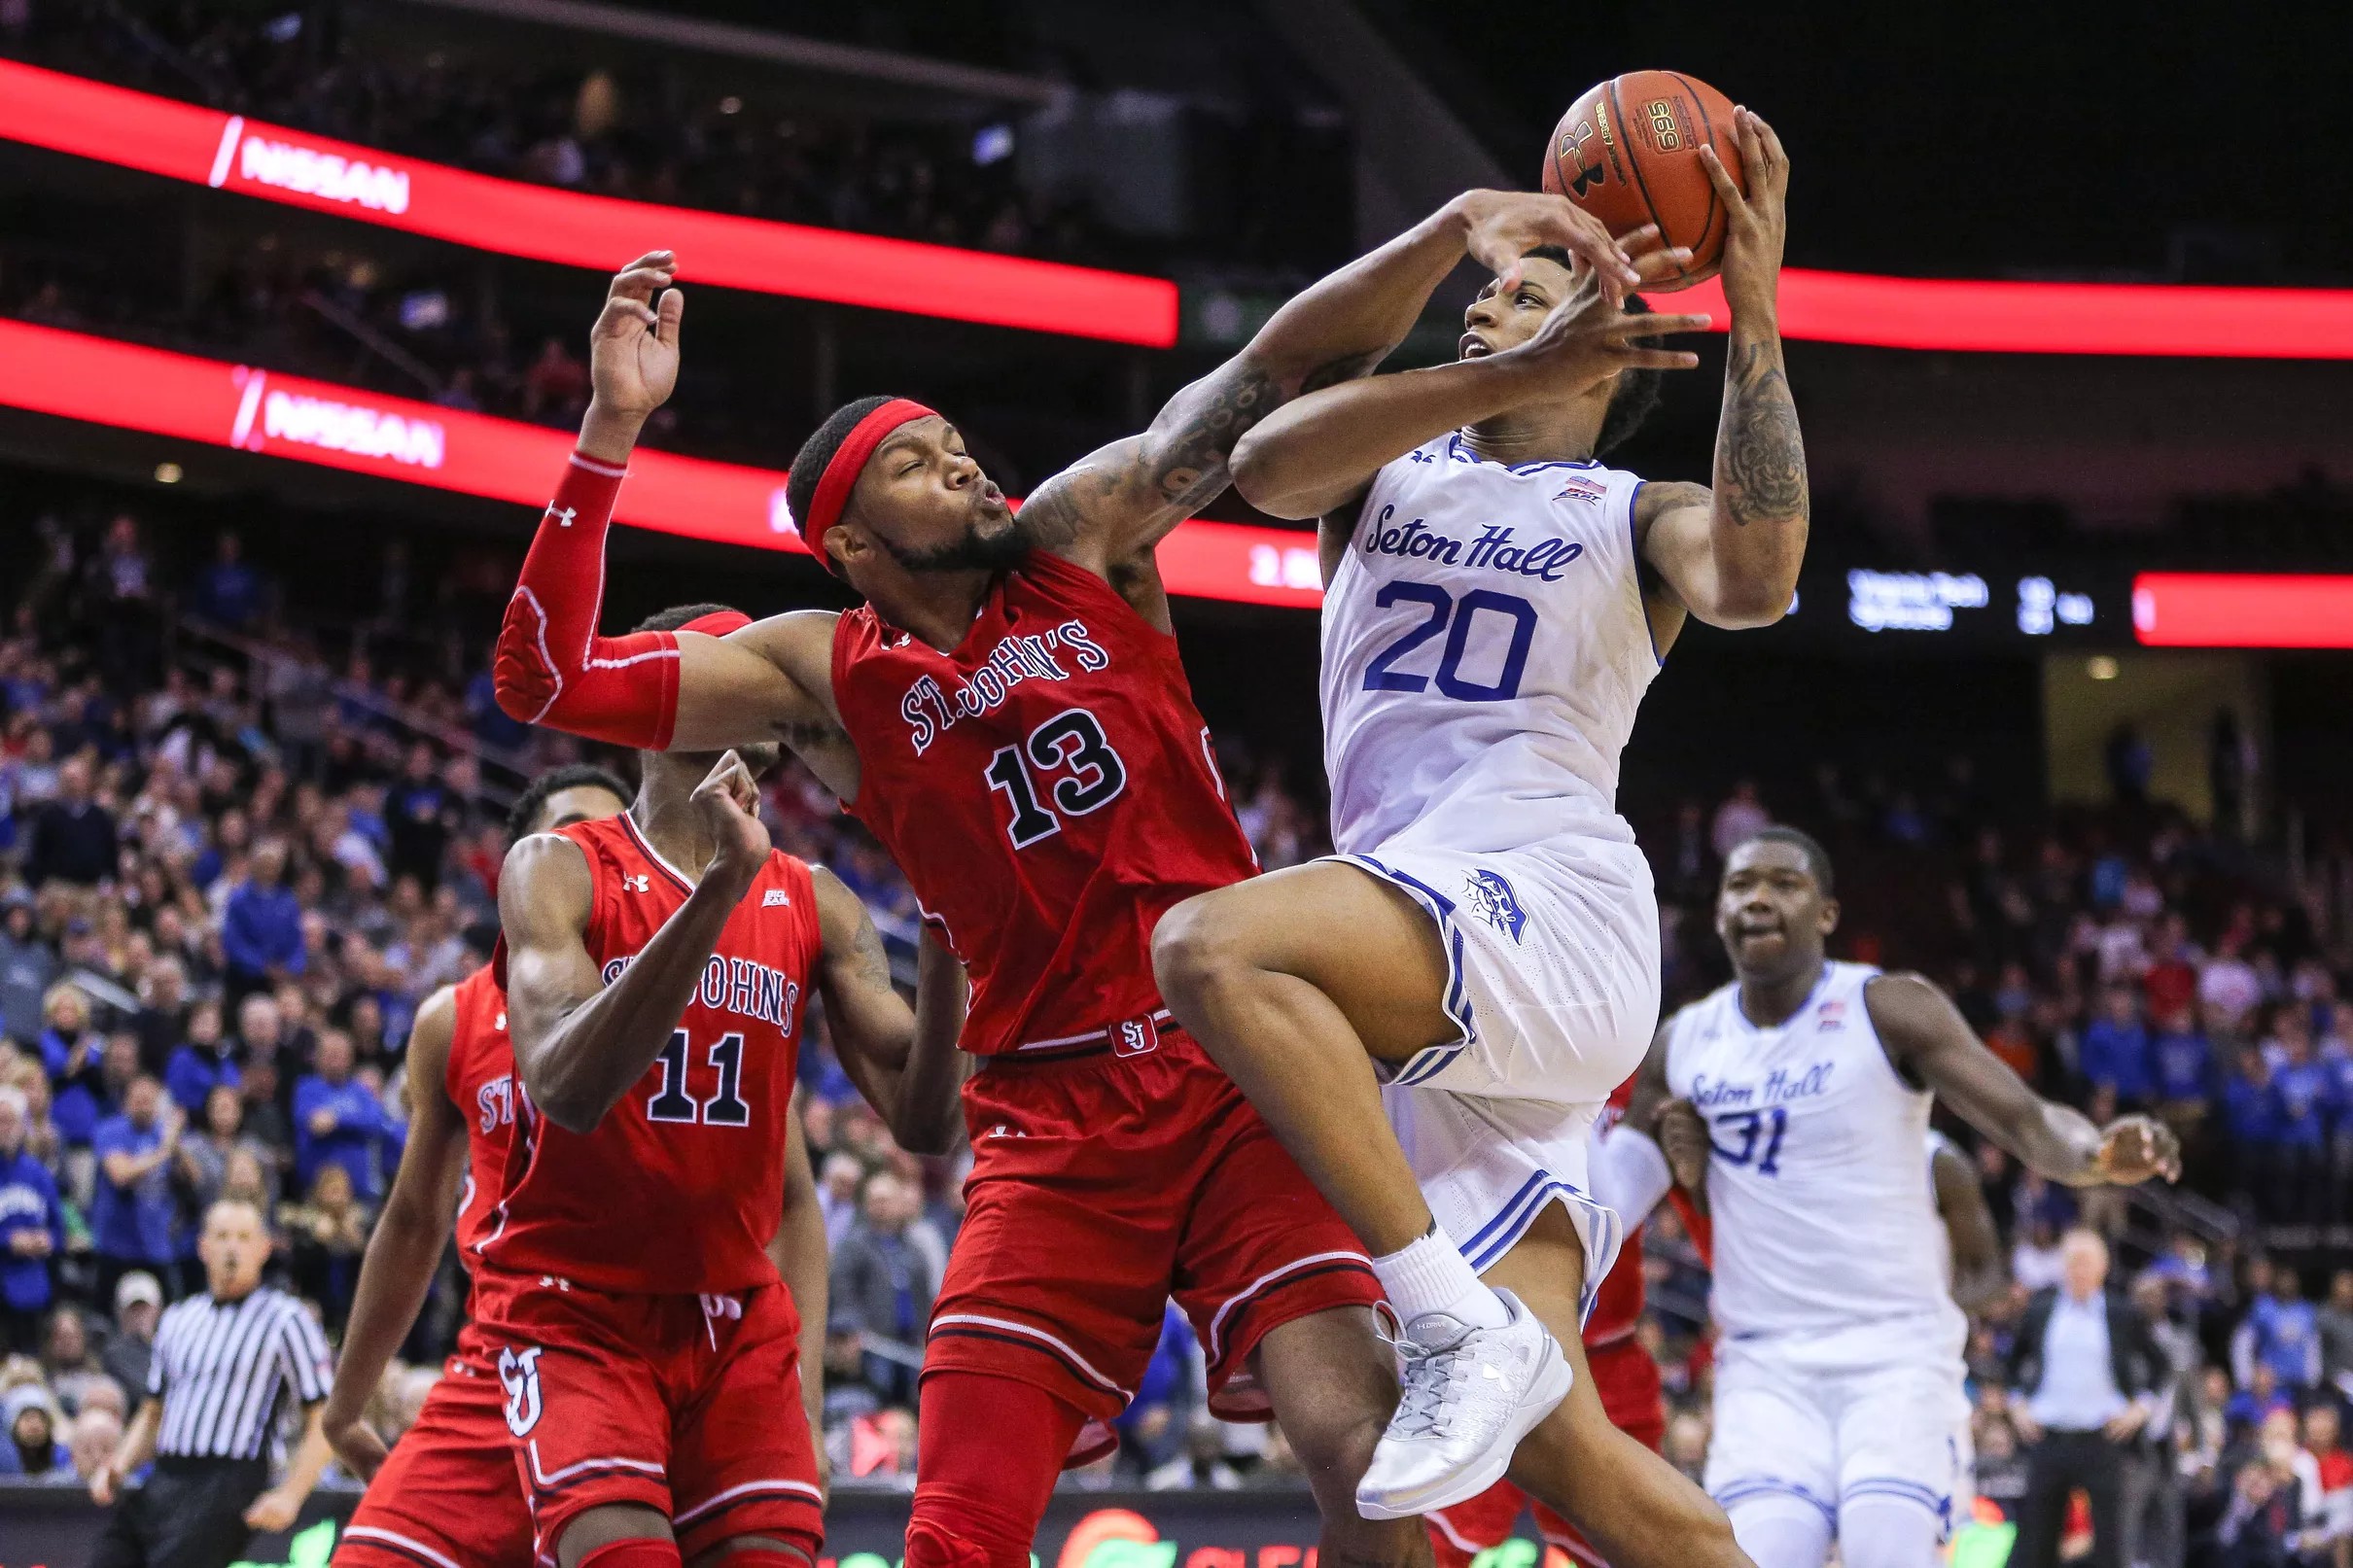 St. John’s vs Seton Hall preview, how to watch, TV